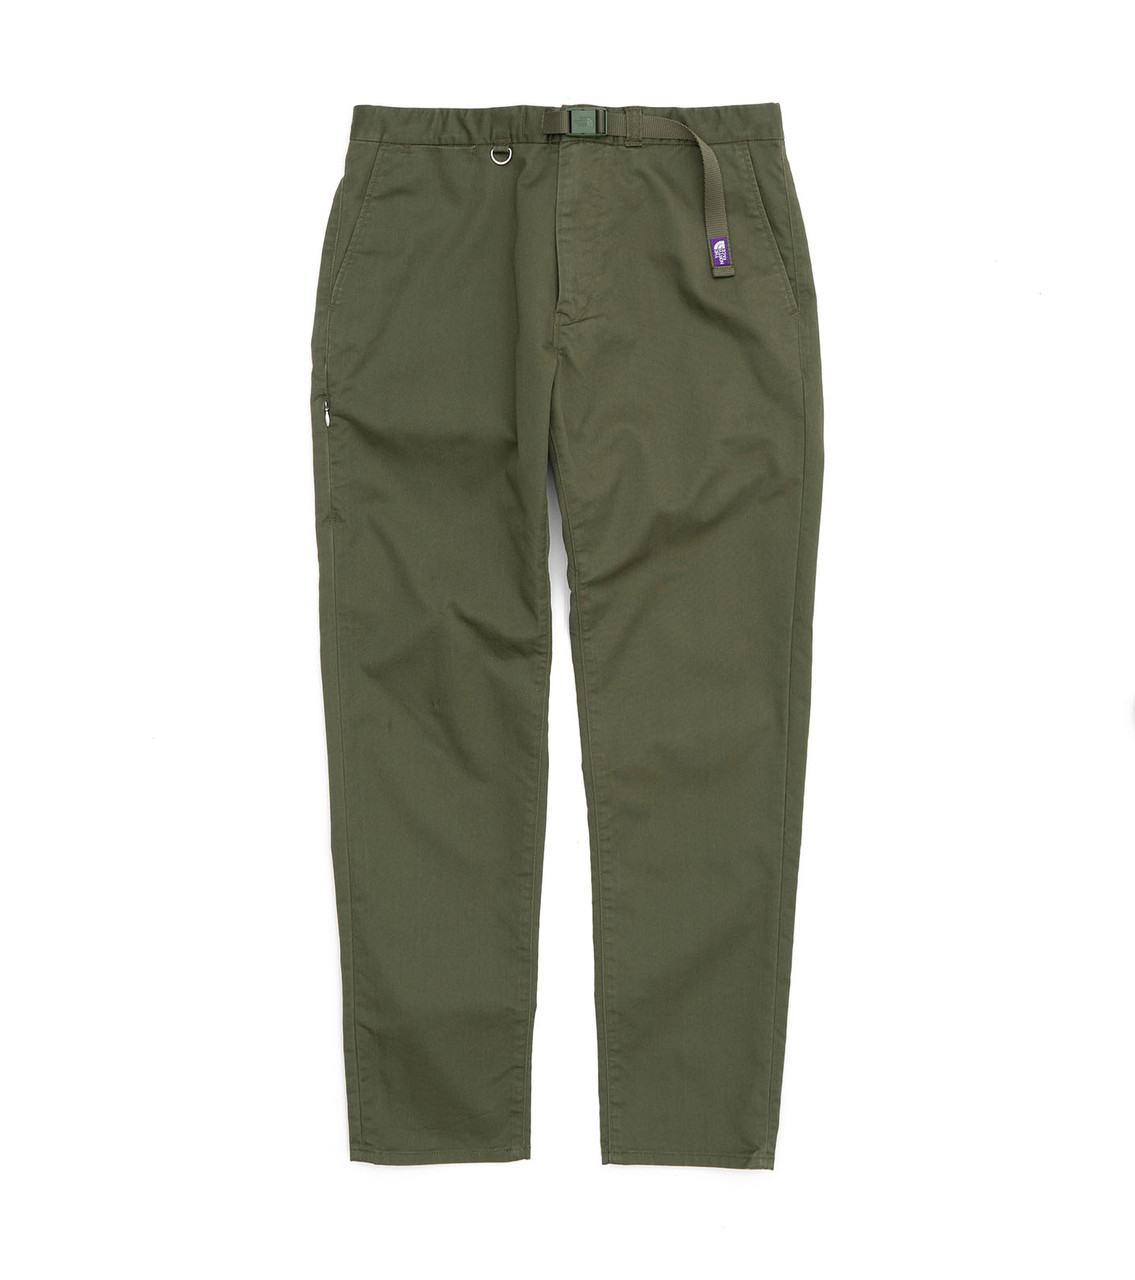 THE NORTH FACE PURPLE LABEL Stretch Twill Tapered Pants NT5051N 6278